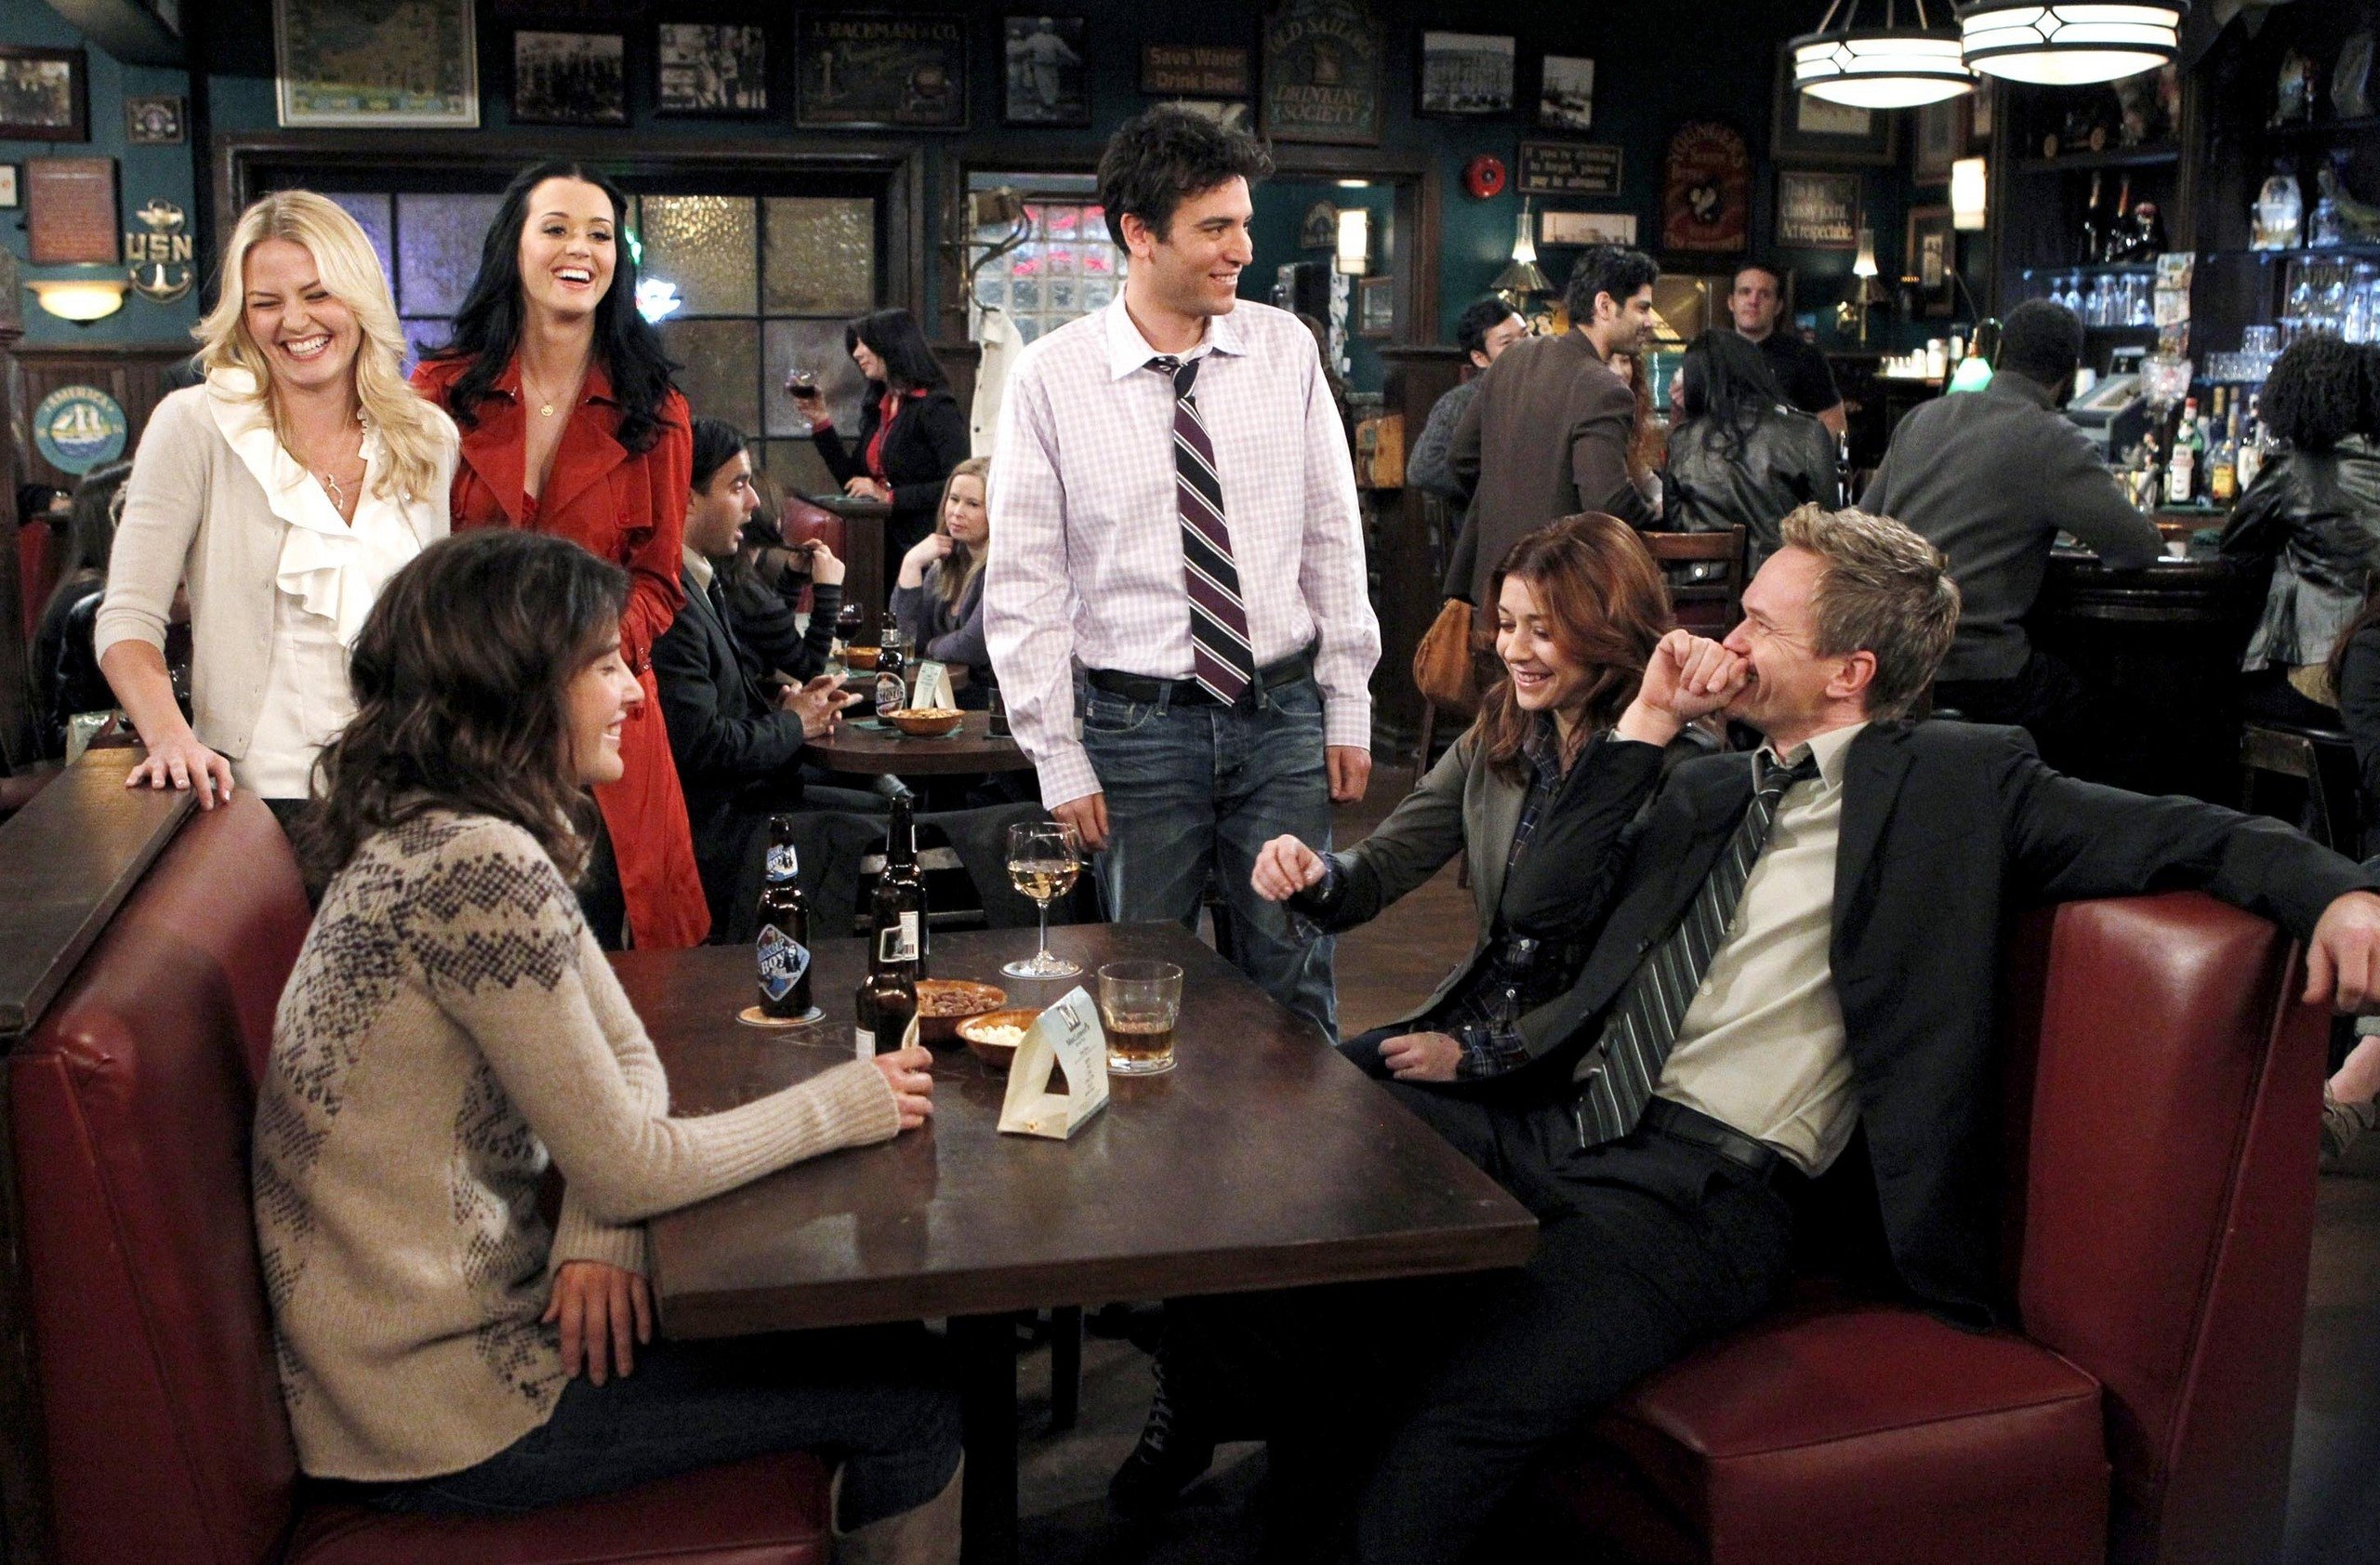 how i met your mother, Comedy, Sitcom, Series, Television, How, Met, Mother,  22 Wallpaper